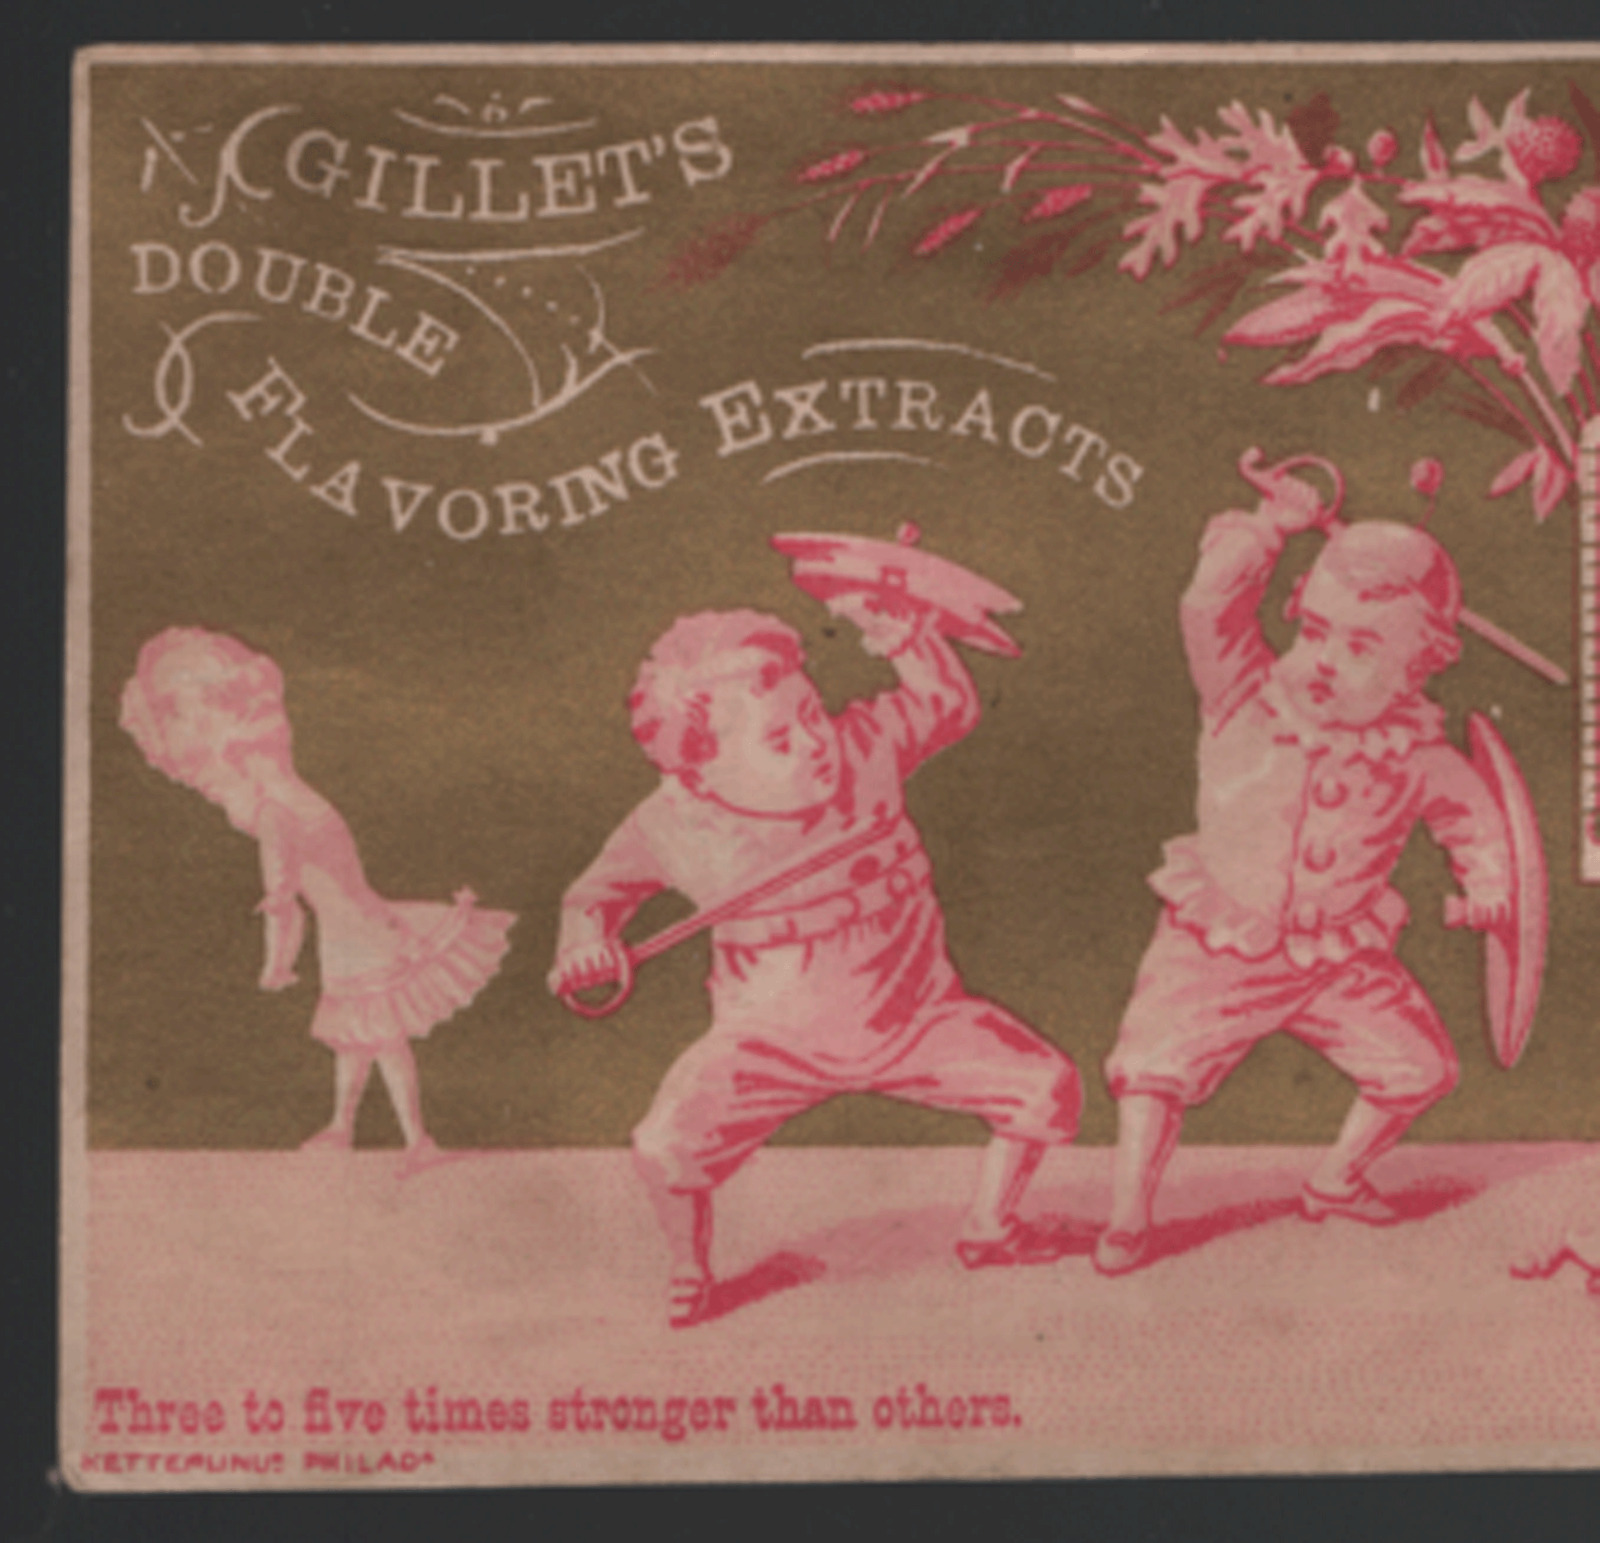 GILLET\'S DOUBLE FLAVORING EXTRACTS TRADE CARD,  SWORD FIGHT OVER A LADY  V243